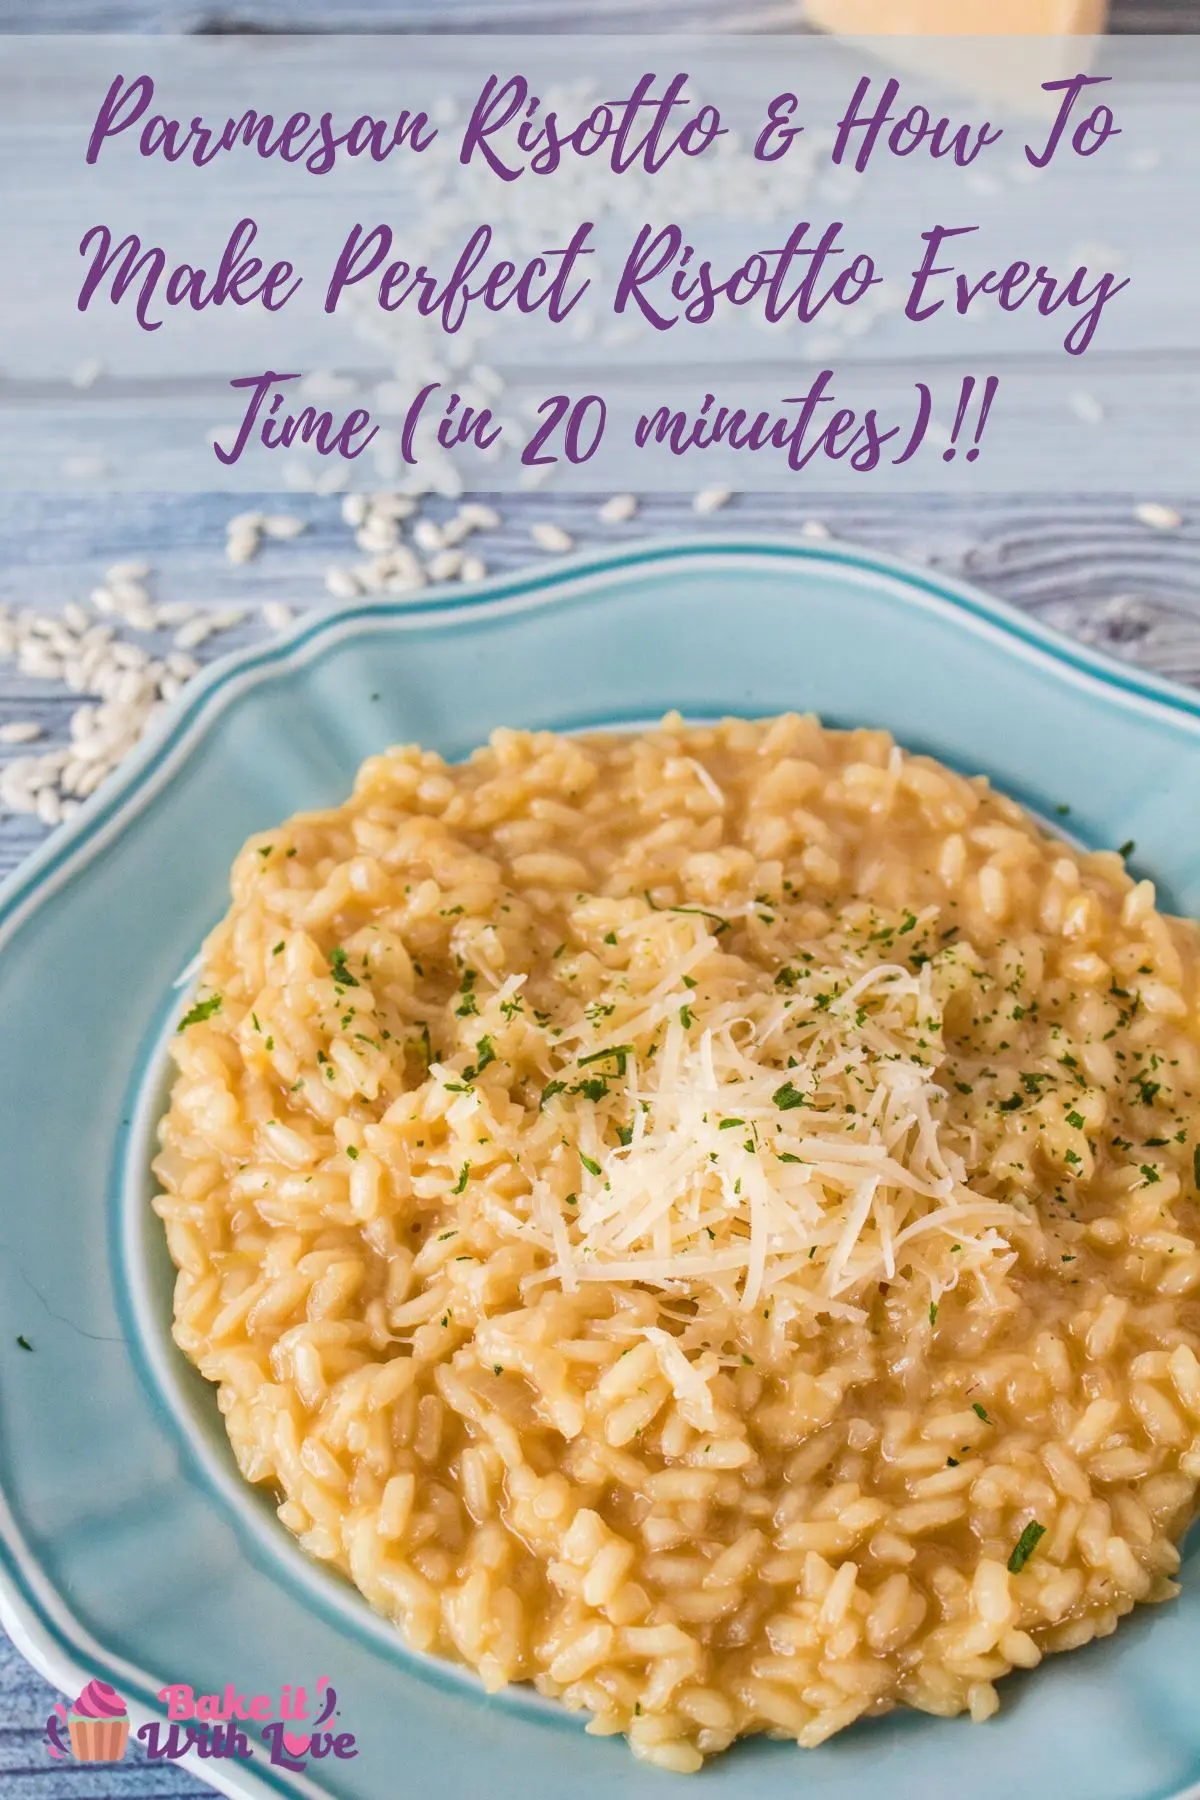 Perfectly creamy Parmesan Risotto is not as daunting as reality television makes it look! It's a super treat and easier than you might think!!